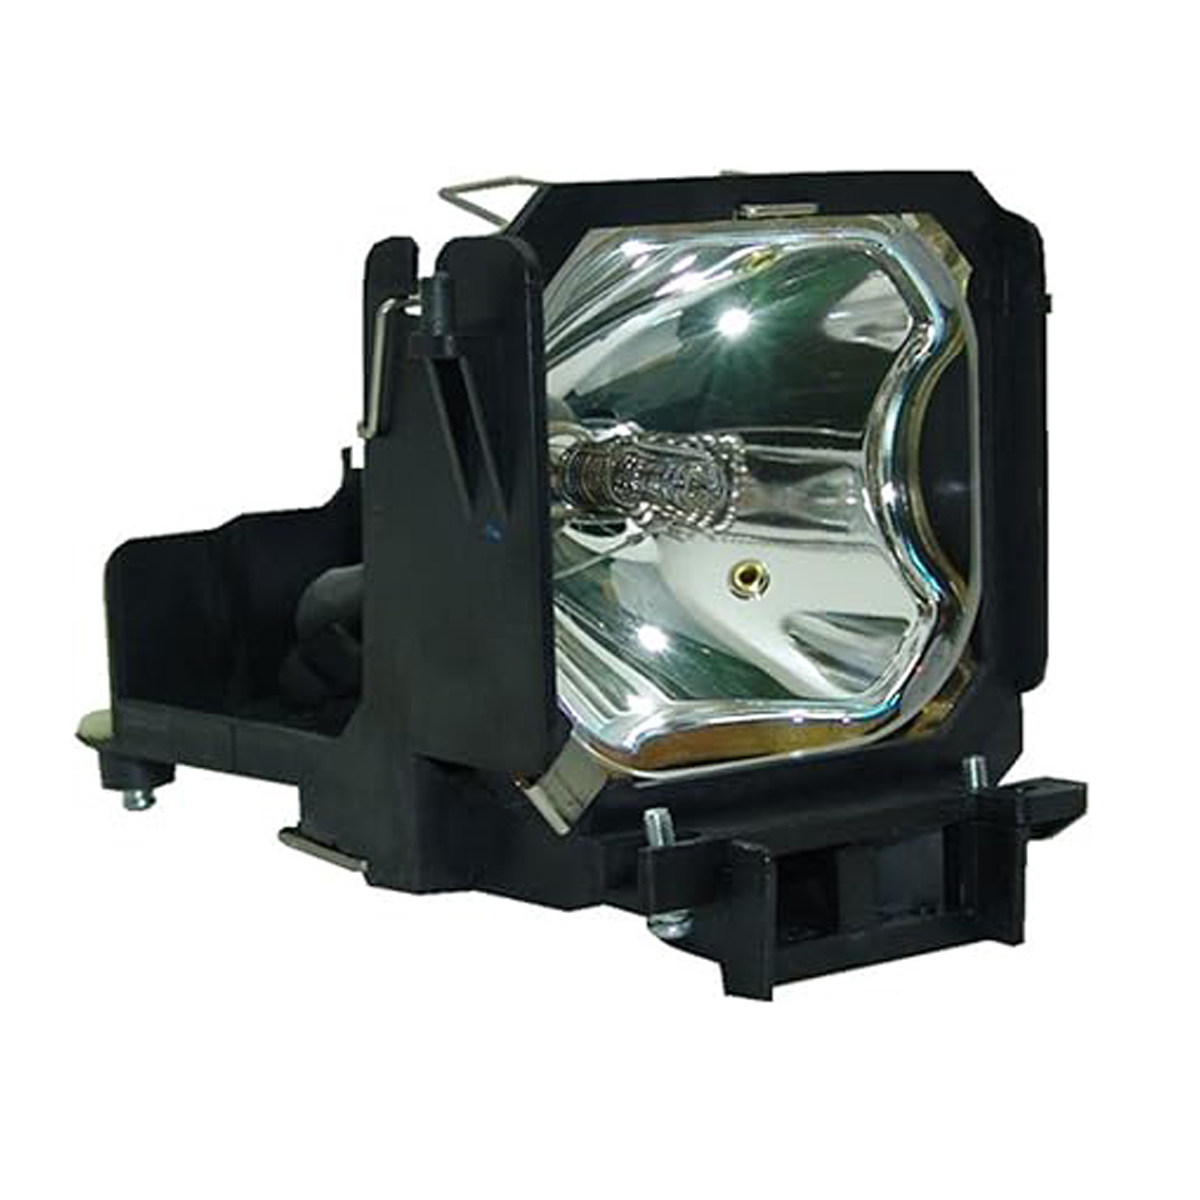 Replacement Projector lamp LMP-P260 For Sony VPL PX35 VPL PX40 VPL PX41